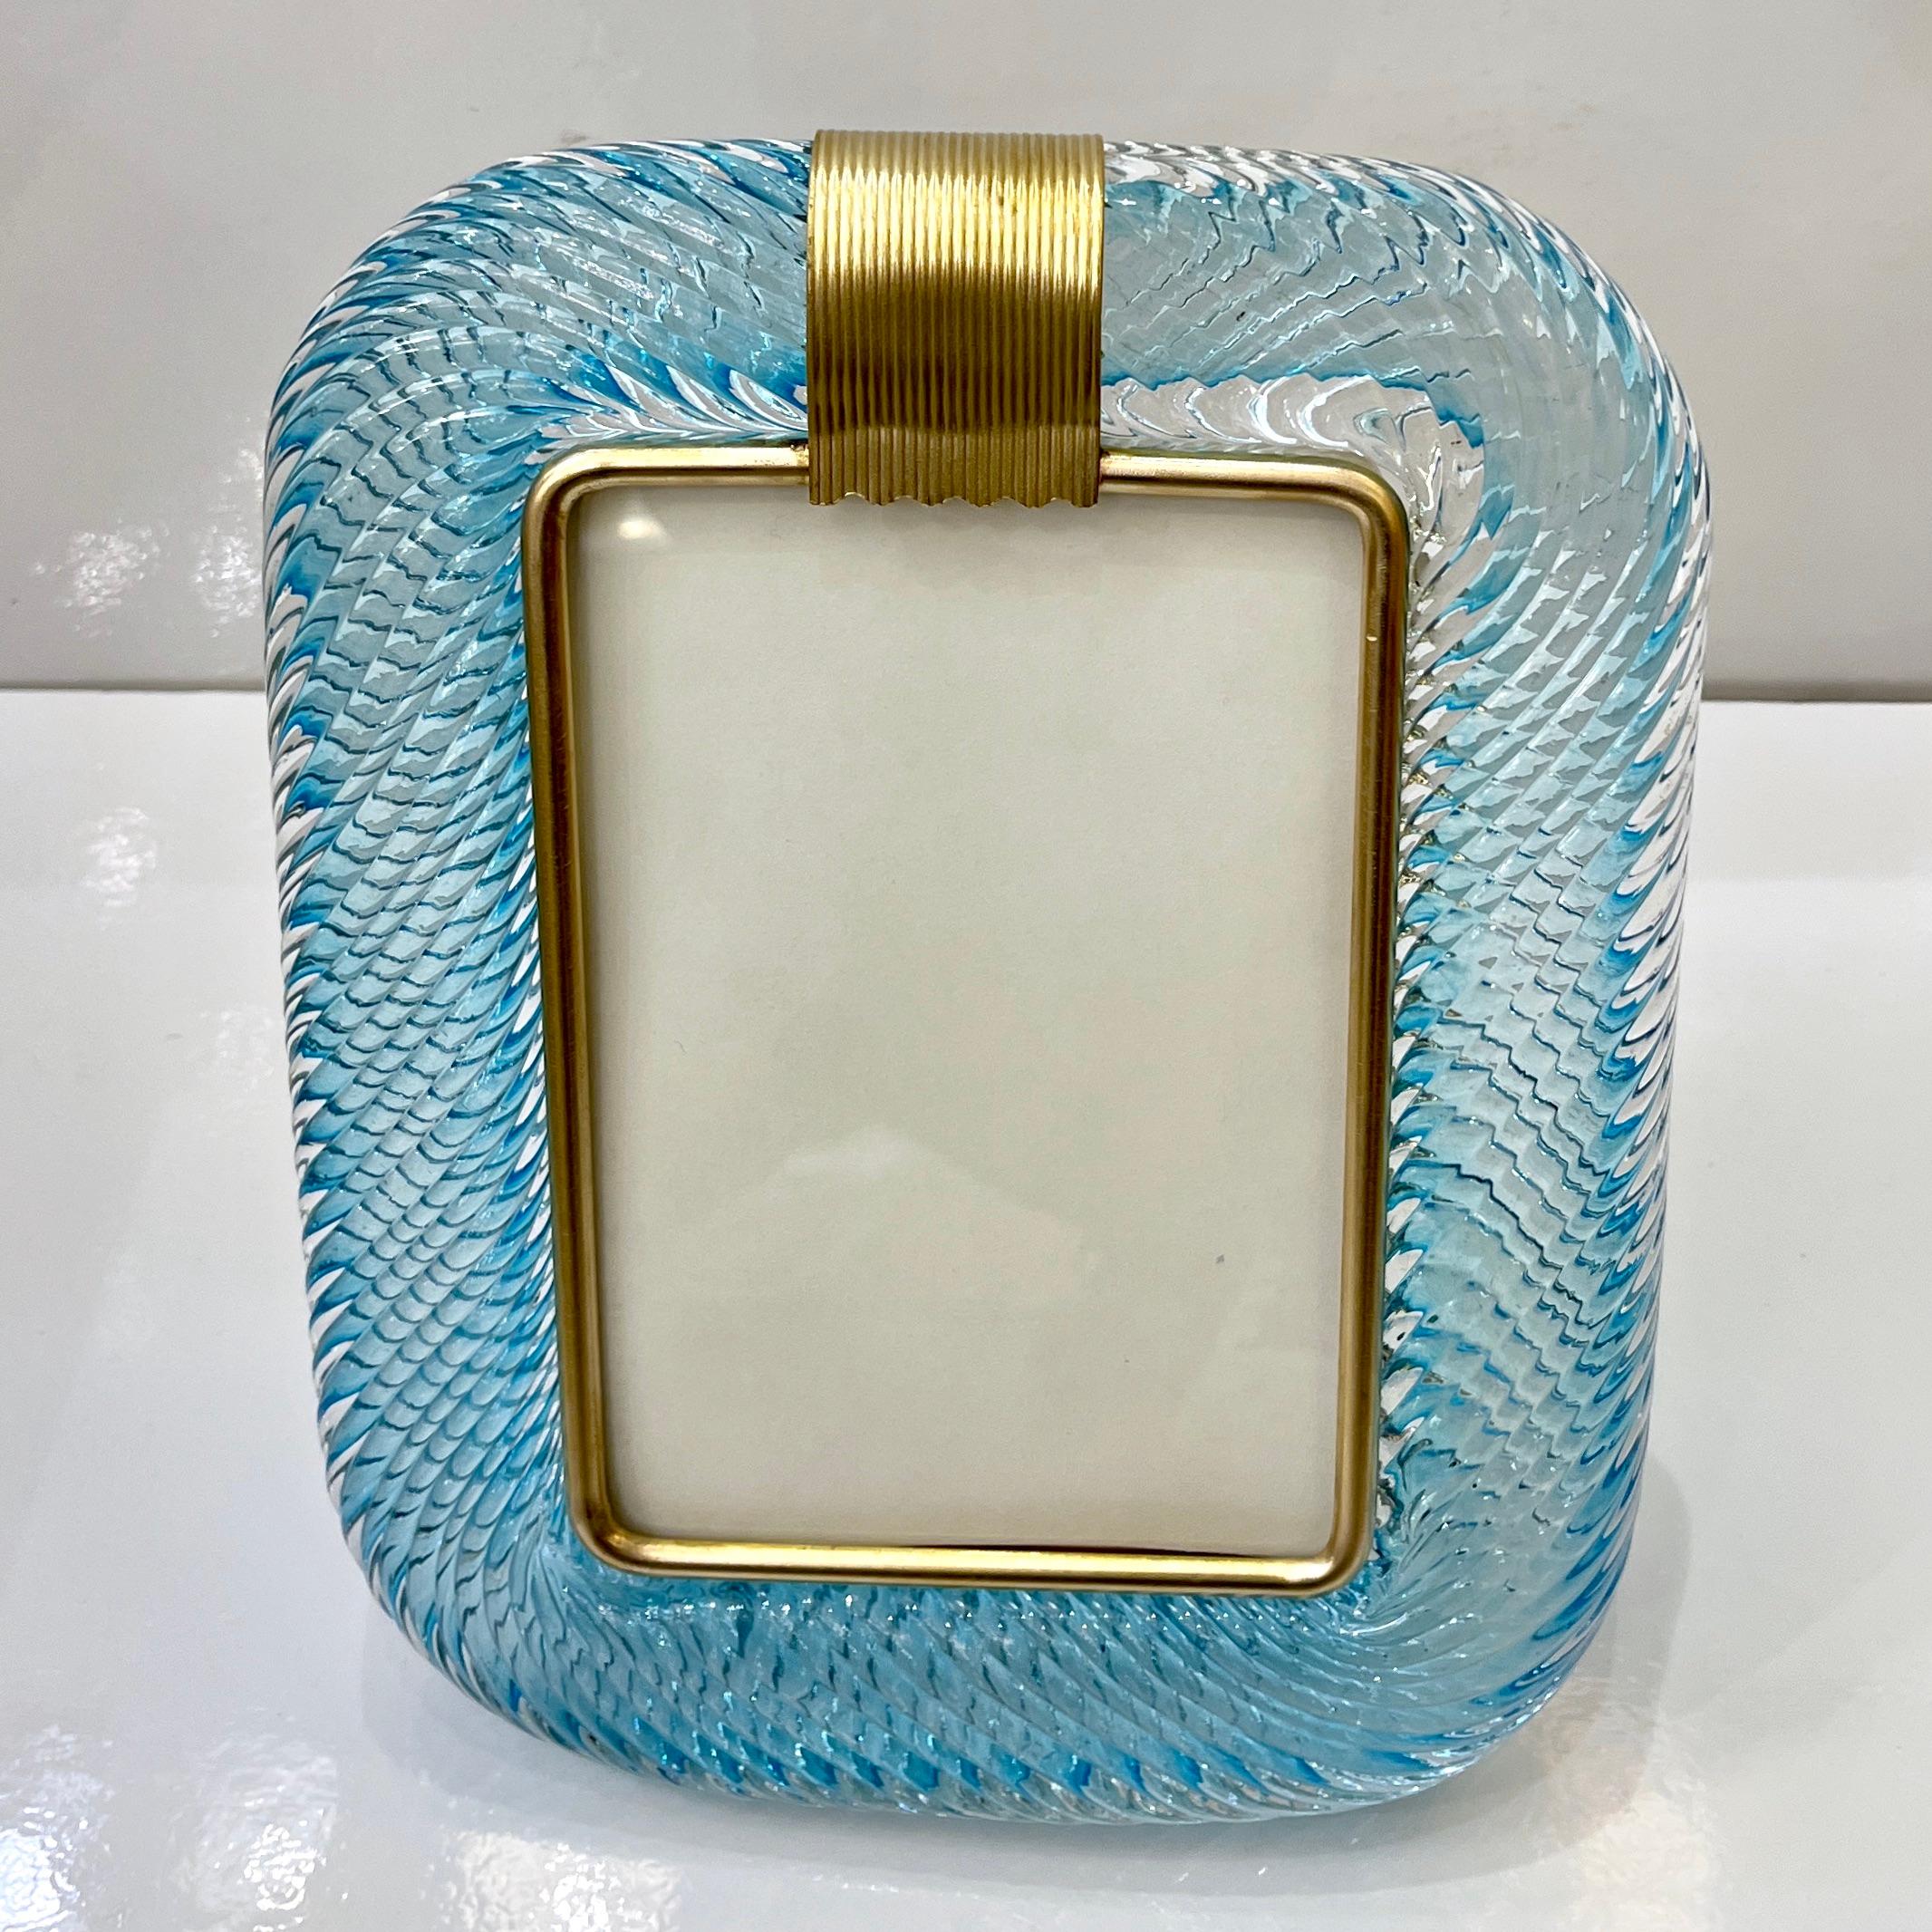 A sophisticated Venetian modern design vertical photo frame in thick blown Murano glass worked in a luscious baby blue turquoise jewel color, by Barovier Toso, signed piece. The elegant texture of the tightly twisted glass frame in the Torchon